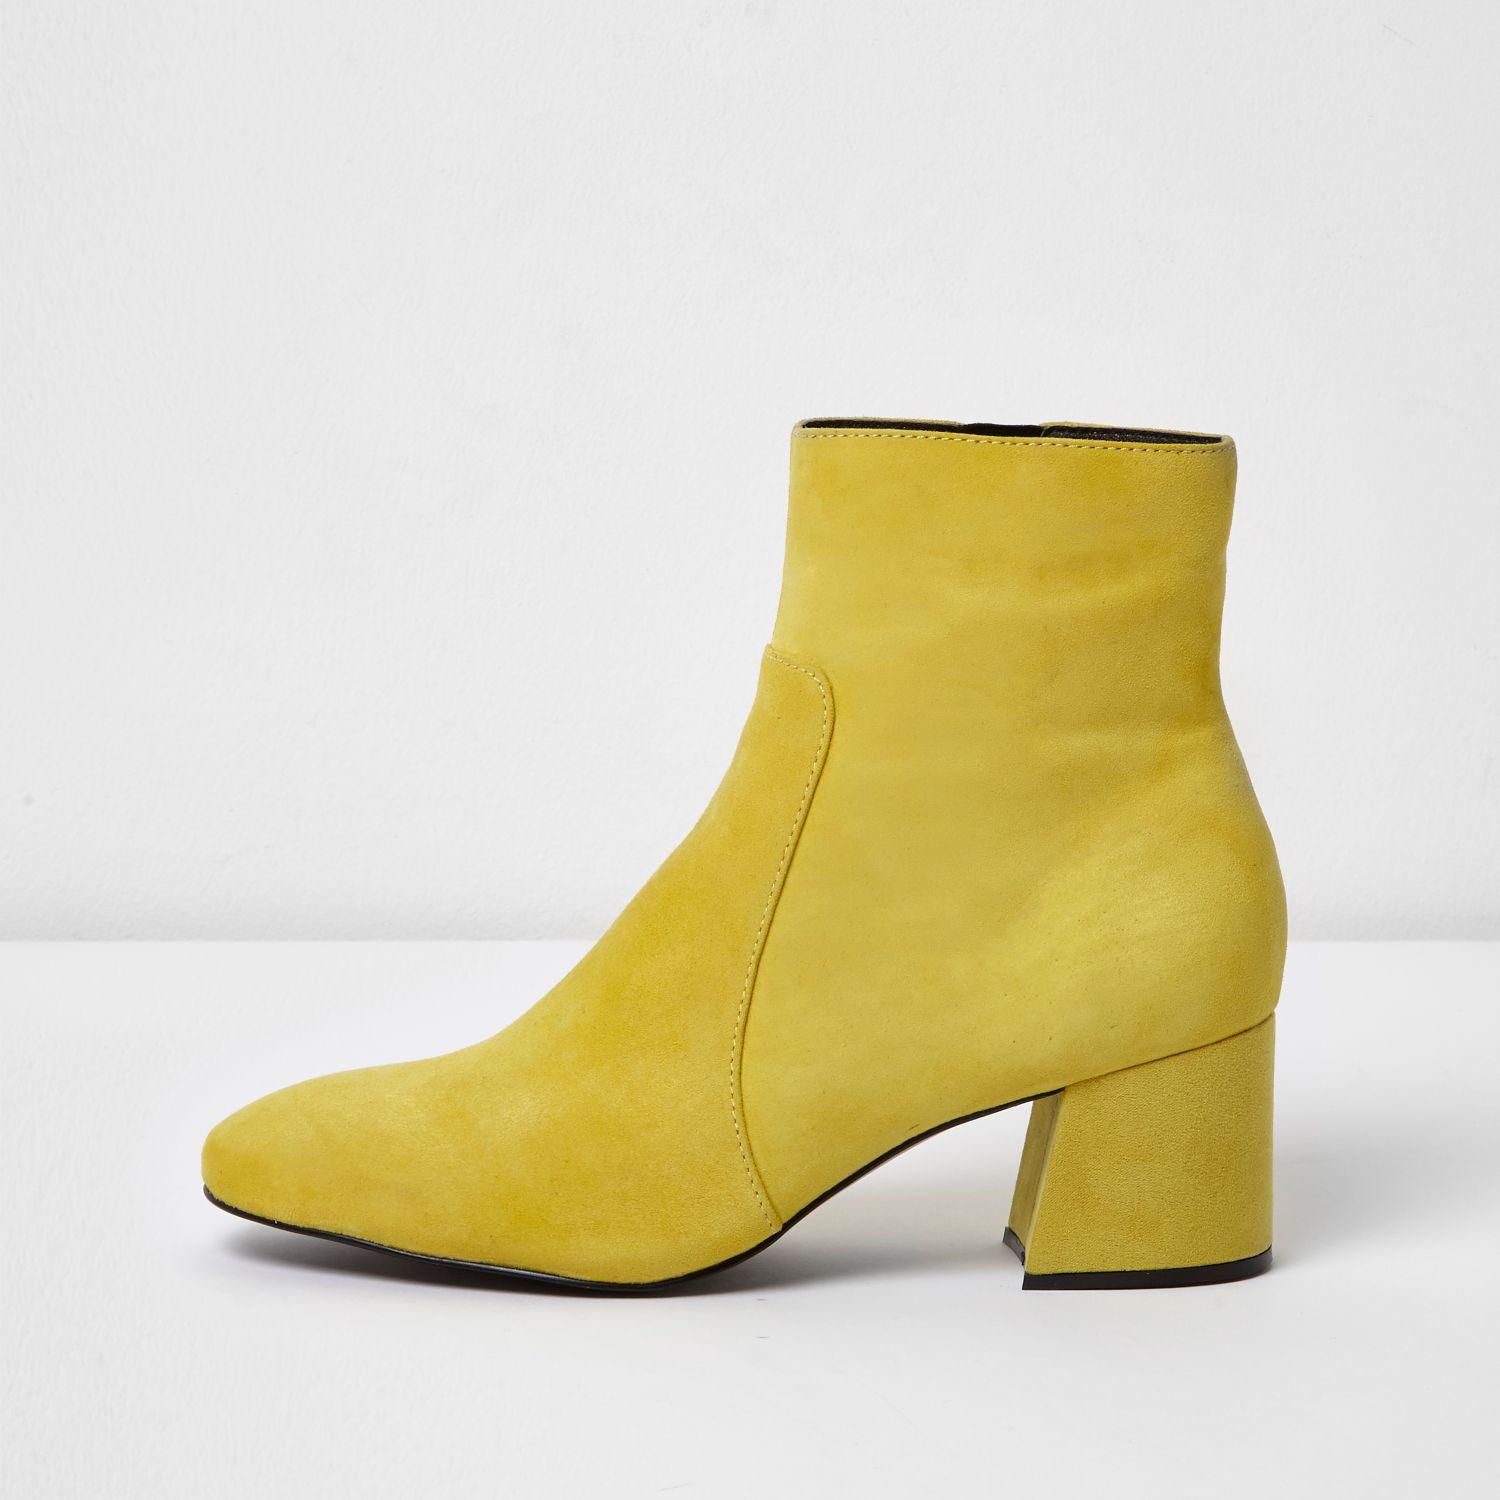 Lyst - River Island Yellow Suede Block Heel Ankle Boots in Yellow